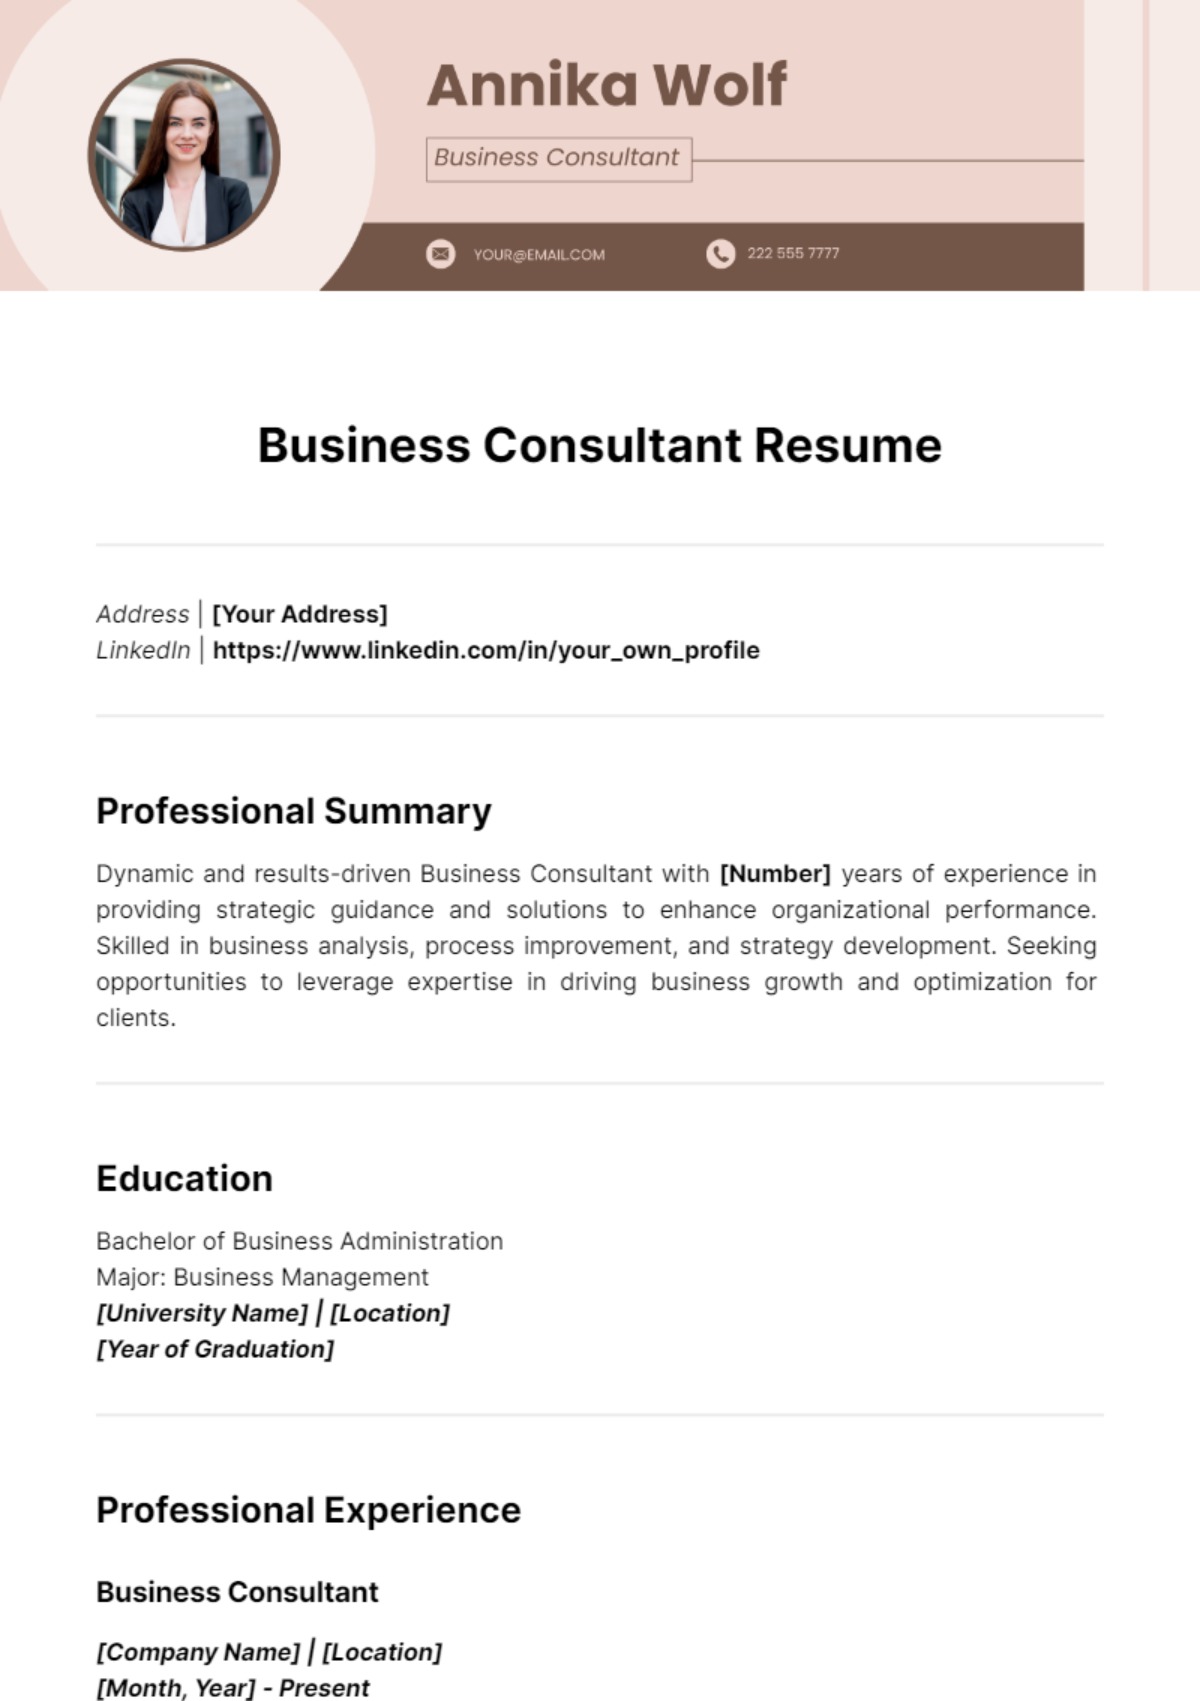 Business Consultant Resume Template